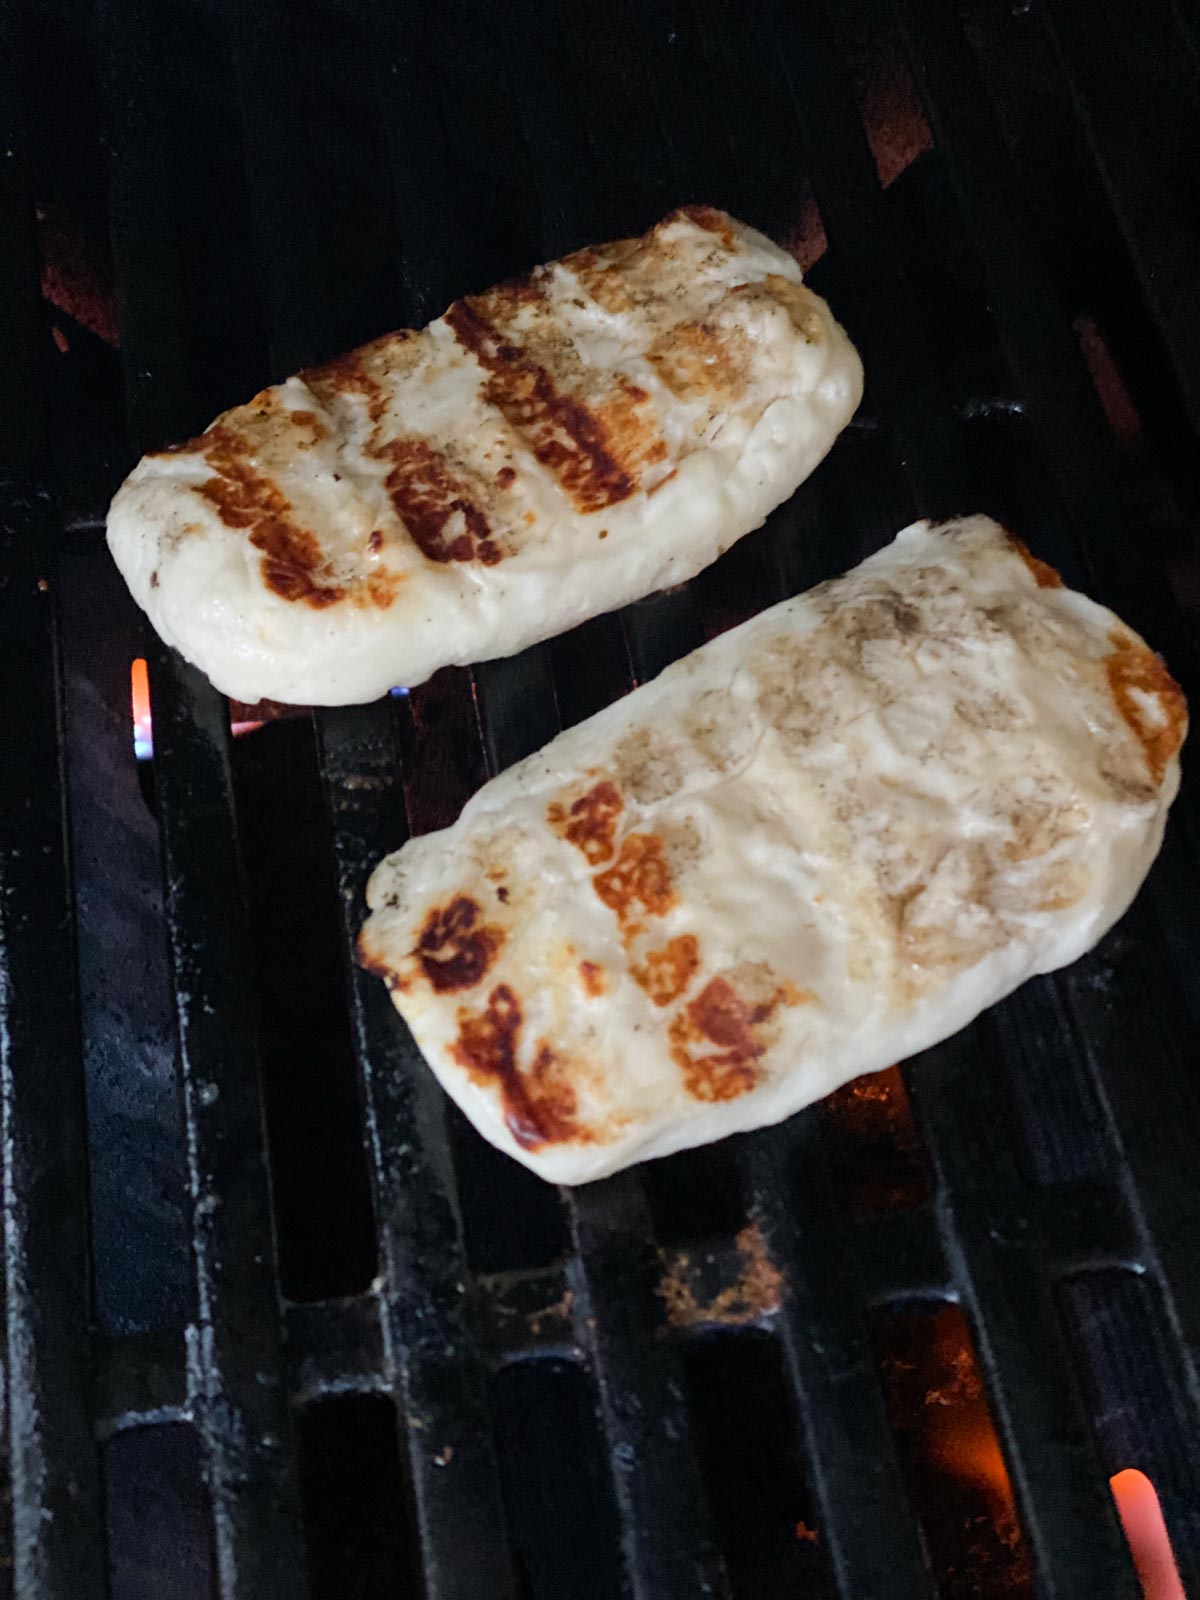 Halloumi with grill marks on a grill.